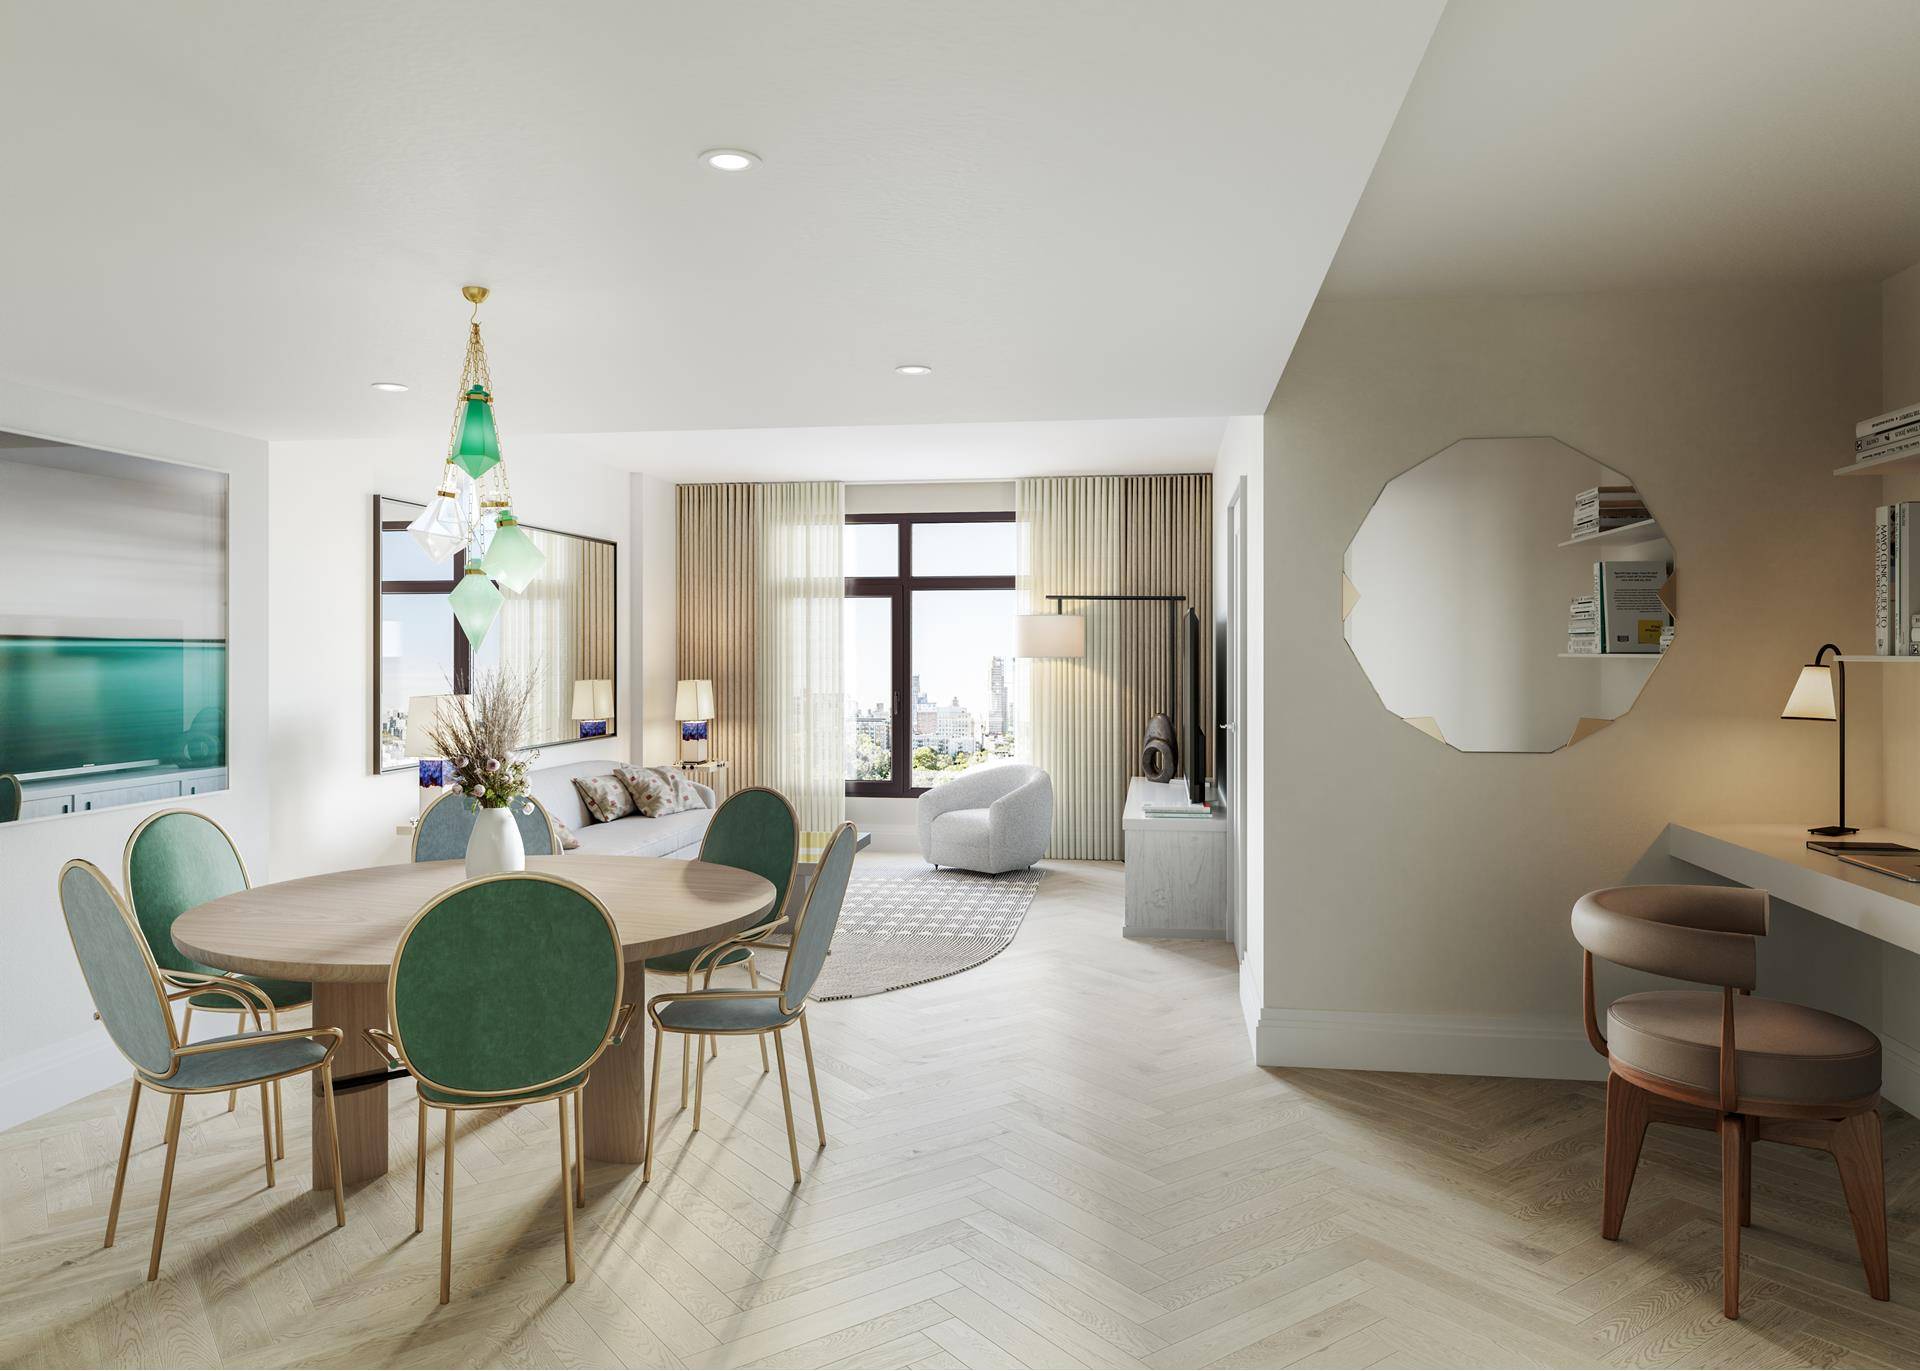 Sales Gallery Now Open By Appointment Introducing residence 5N at 300 West, a west facing one bedroom, one bathroom, offering 200 square foot outdoor terrace and expansive living dining area ...